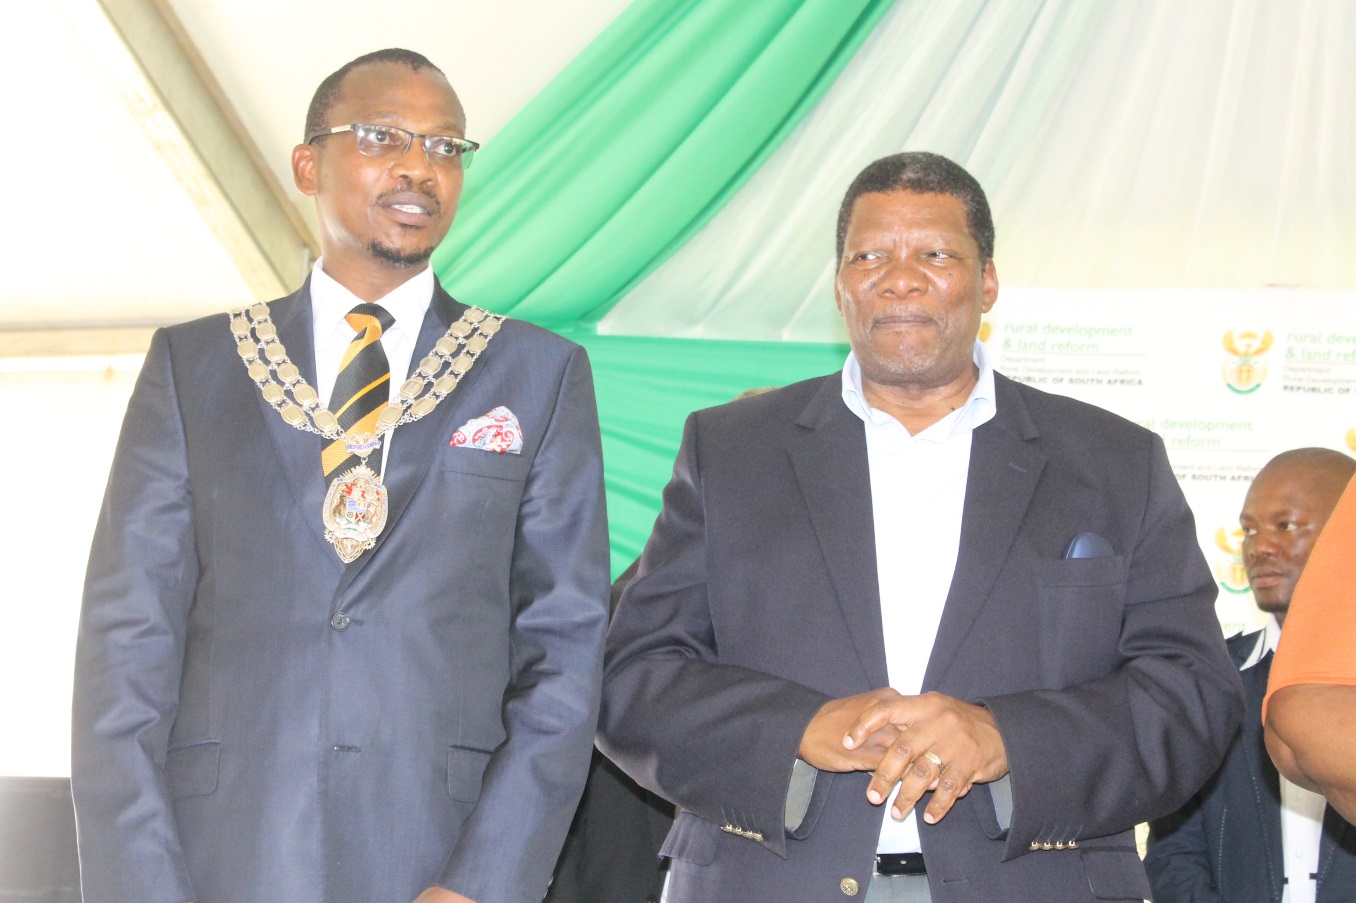 Minister of Rural Development and Land Reform, Mr Gugile Nkwinti with Mayor of the Newcastle Municipality, Cllr Makhosini Nkosi